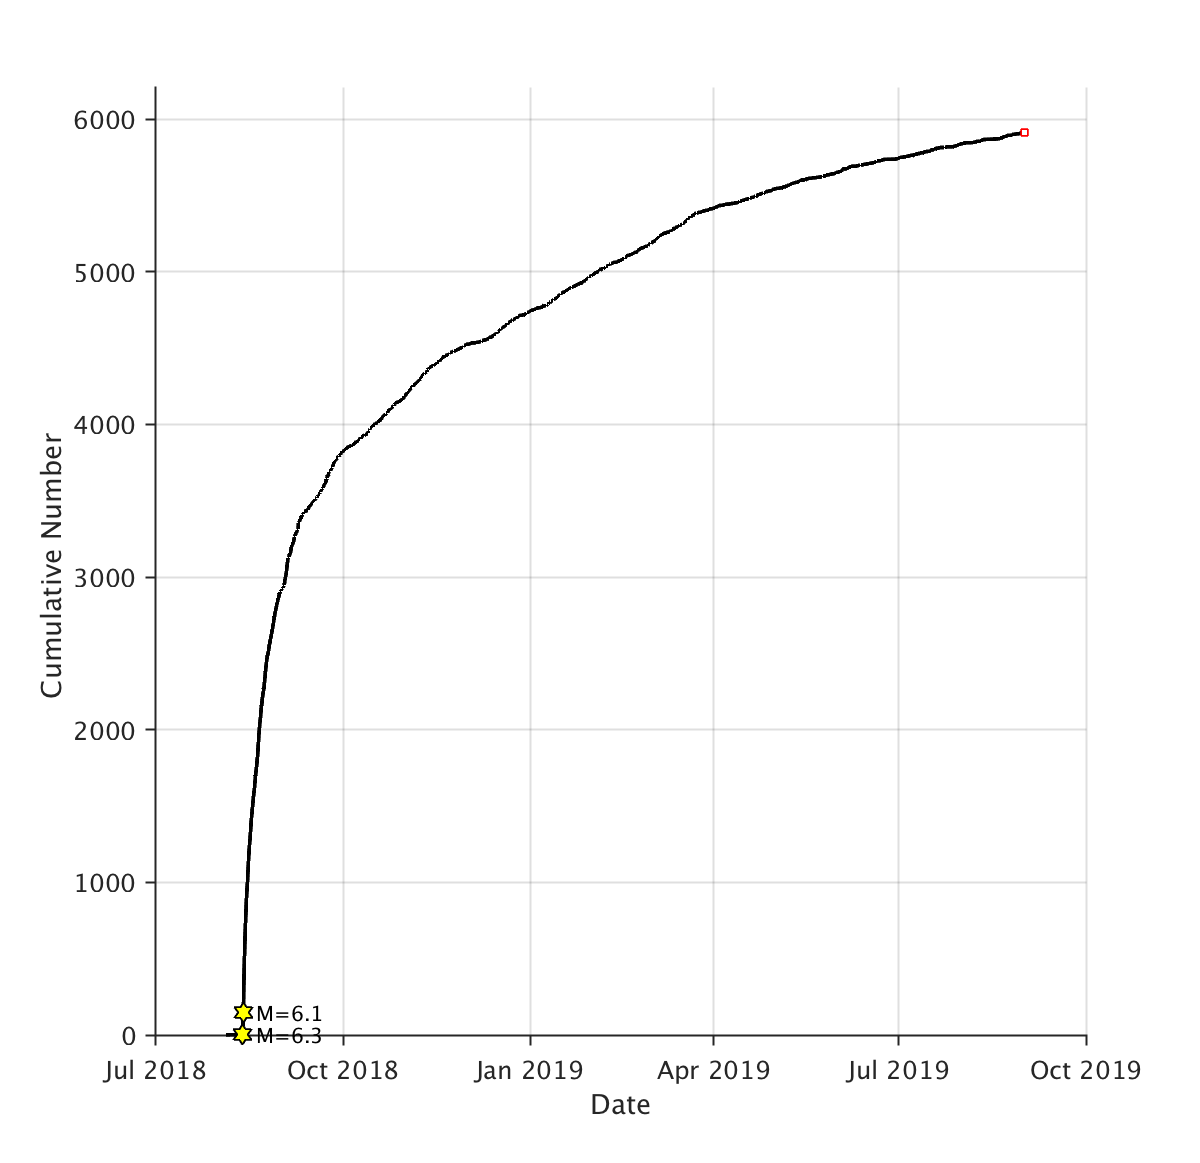 Line graph with cumulative number of earthquakes on vertical axis, dates on horizontal axis. From August 2018 to October 2018, the line rises steeply to almost 4,000 aftershocks, then starts a more gradual curve to almost 6,000 aftershocks in October 2019.